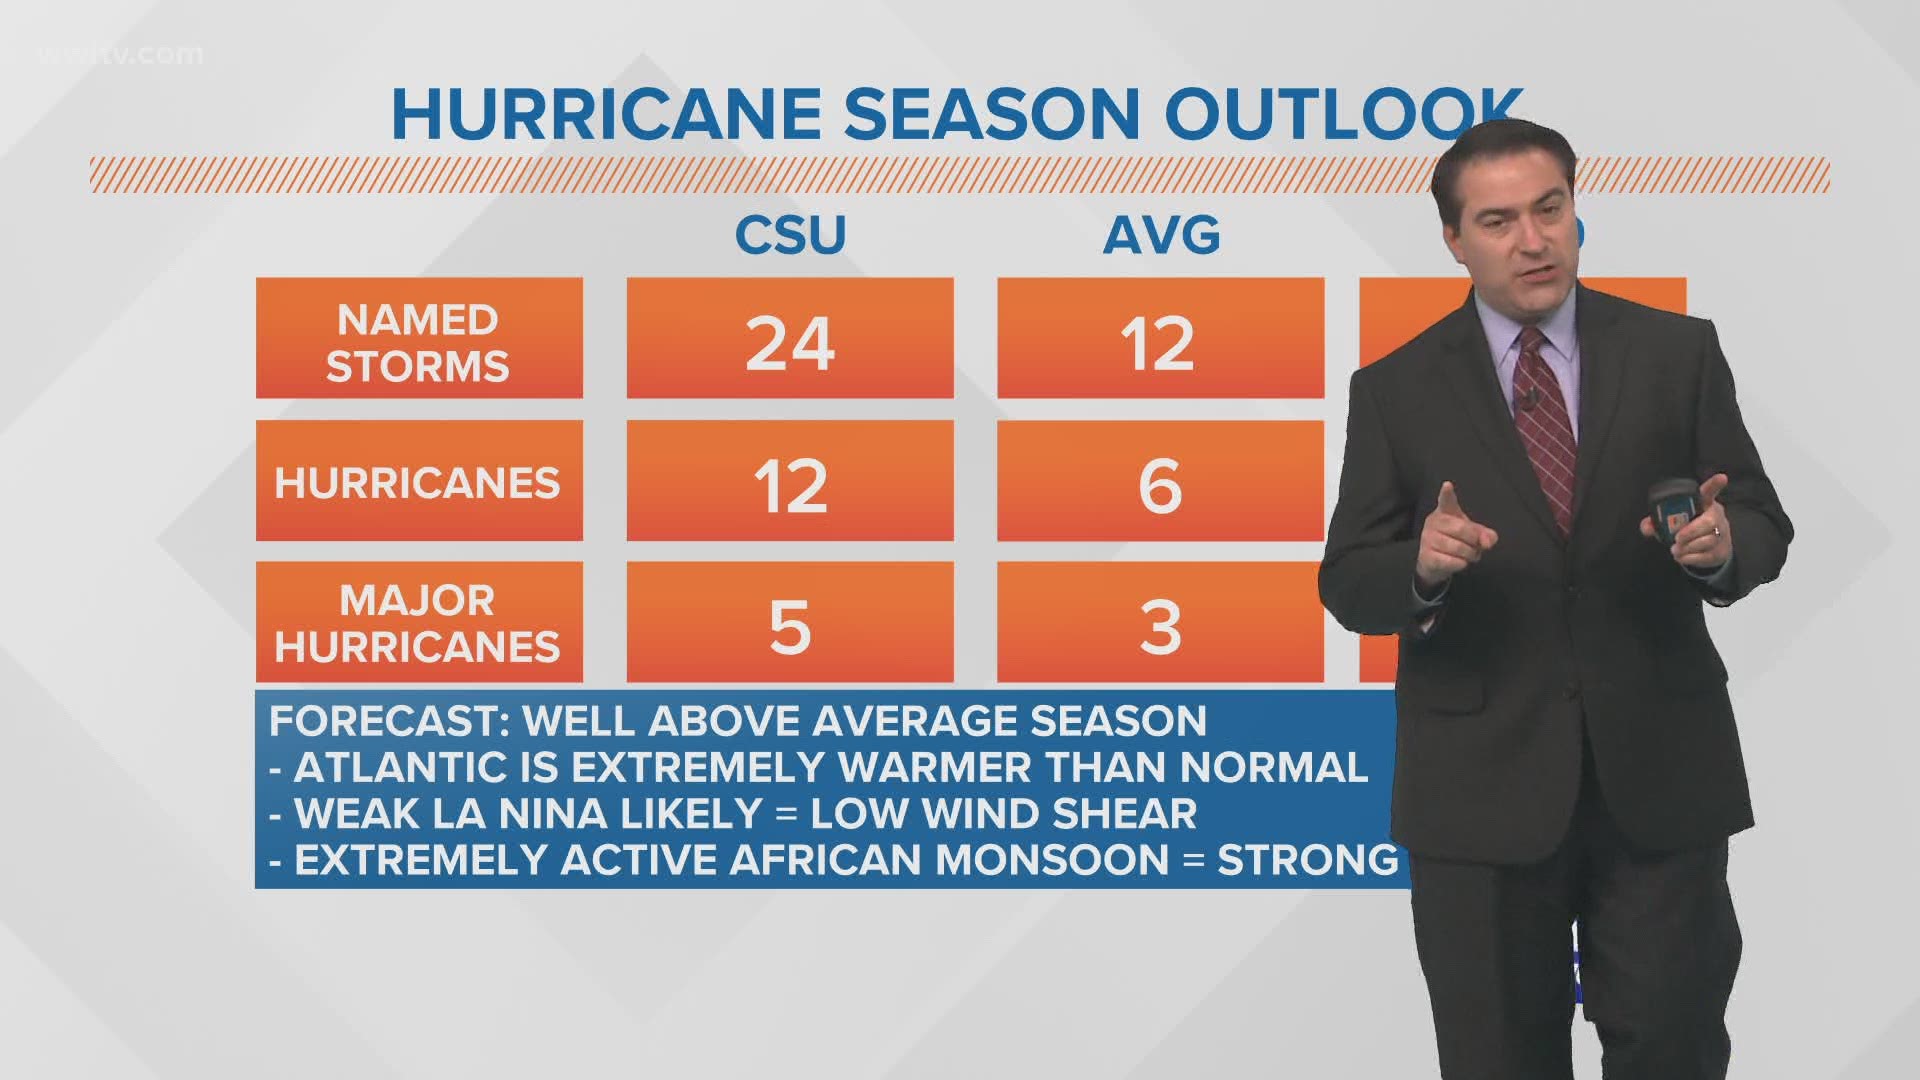 Colorado State University's hurricane forecasters believe there will be quite an uptick in the number of named storms to finish this season.